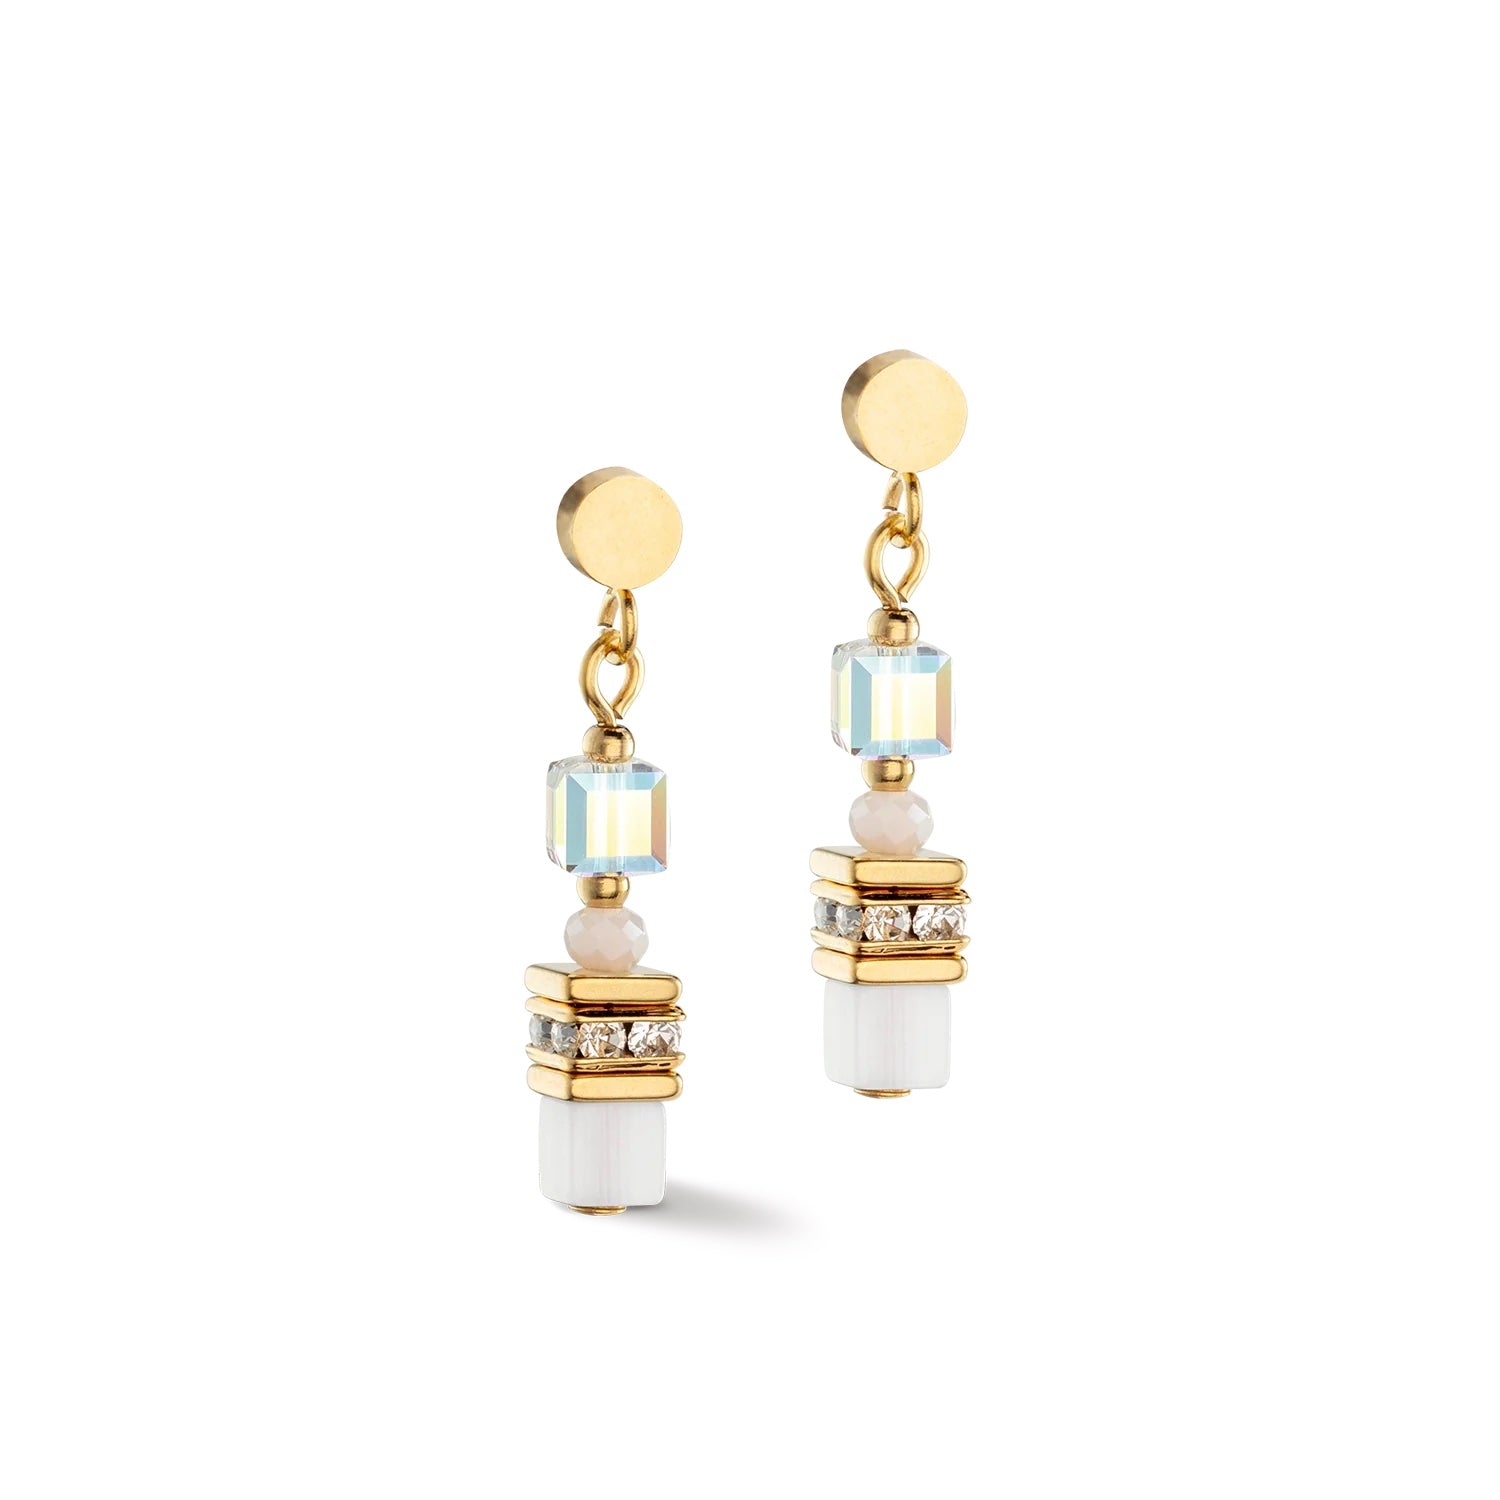 sparkling crystal earrings with mini cubes of gold and white